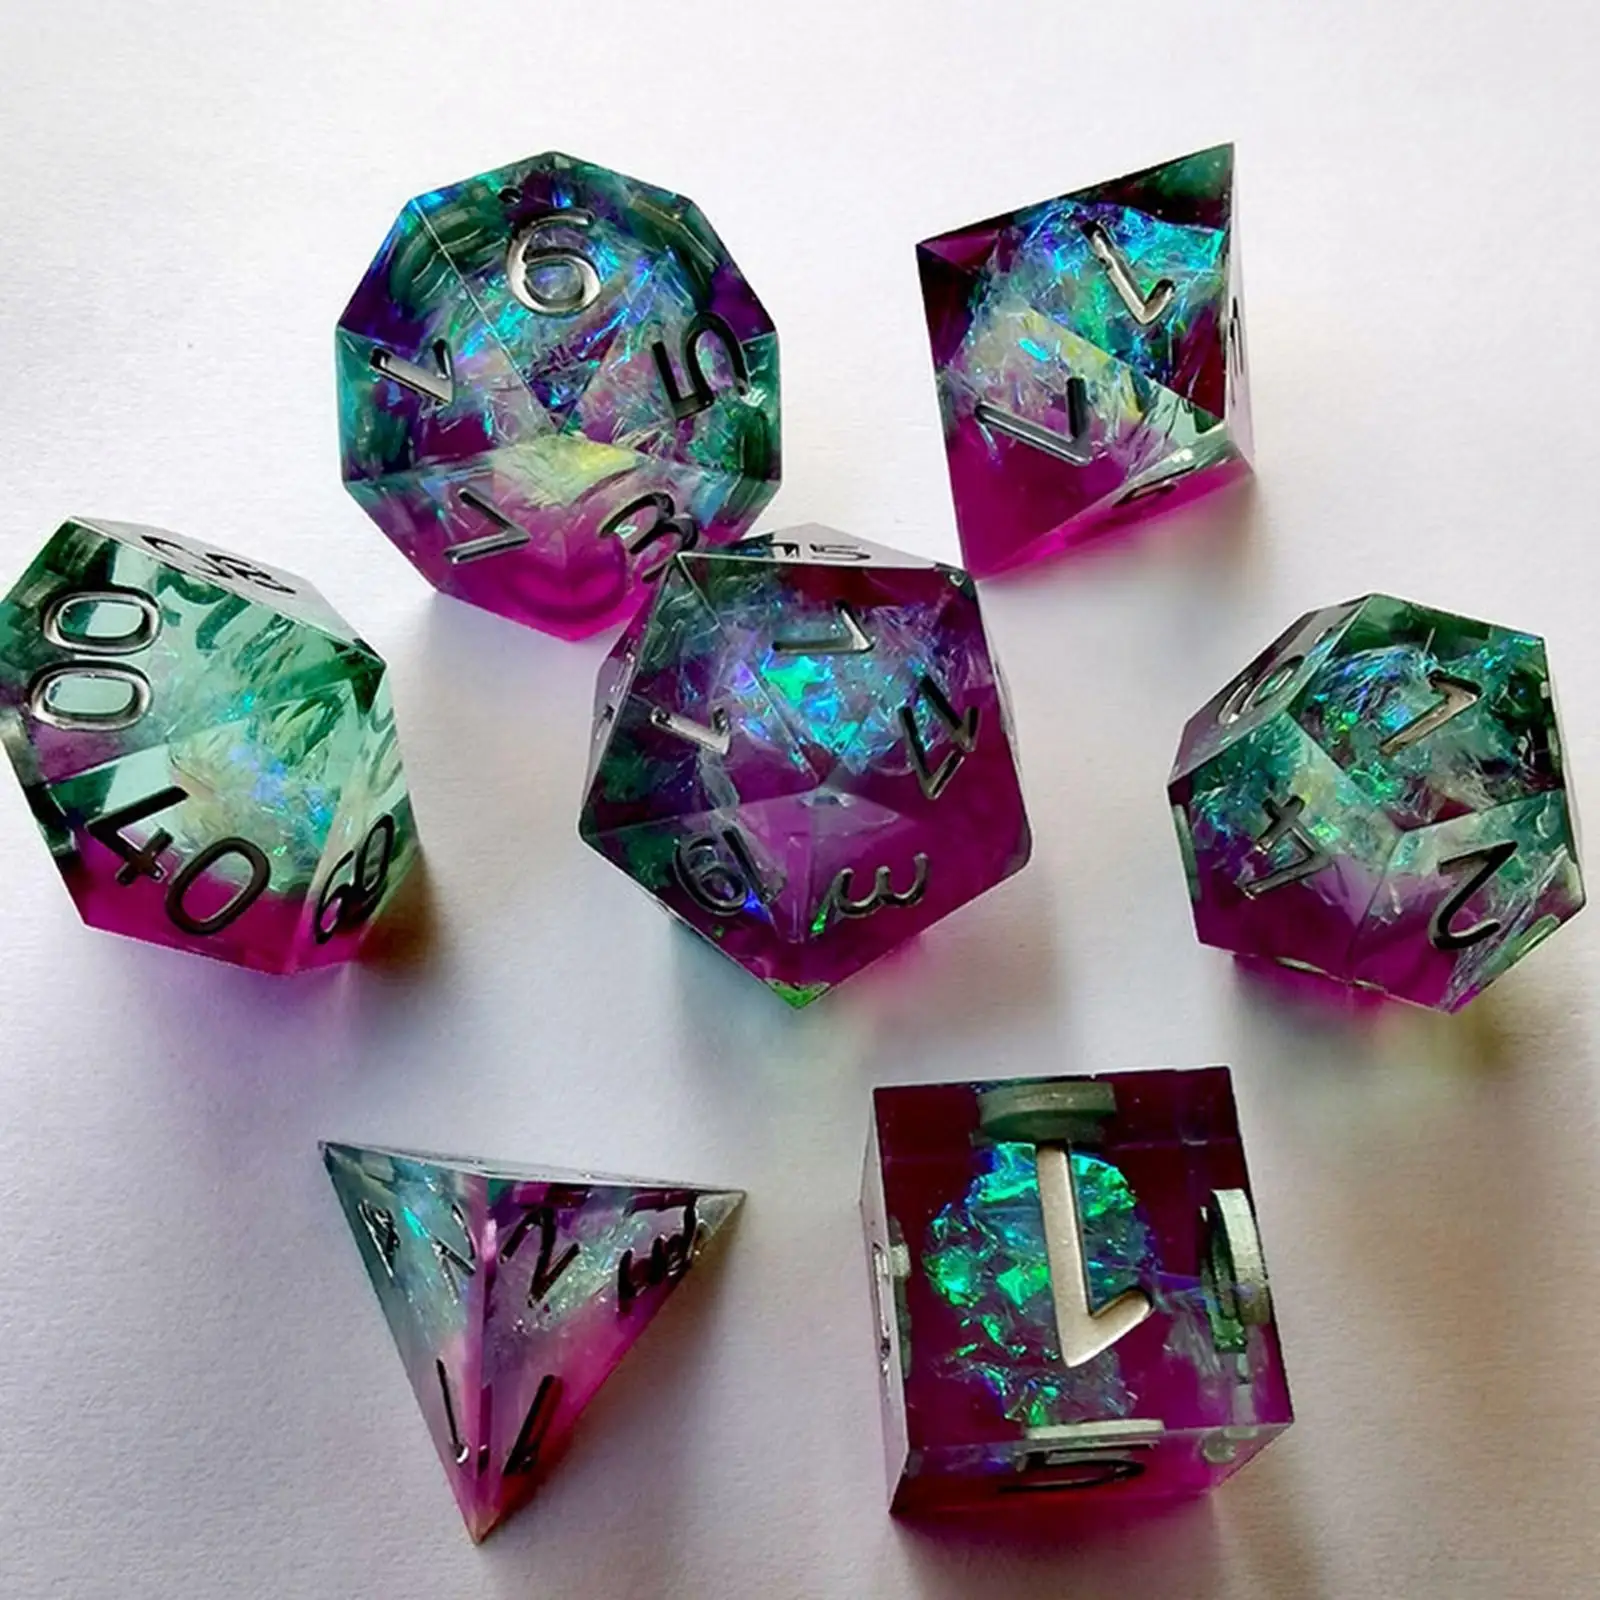 Polyhedral Dice D4 D6 D8 2XD10 D12 D20 Double-Colors Lightwheigt Handcrafted Designer for MTG